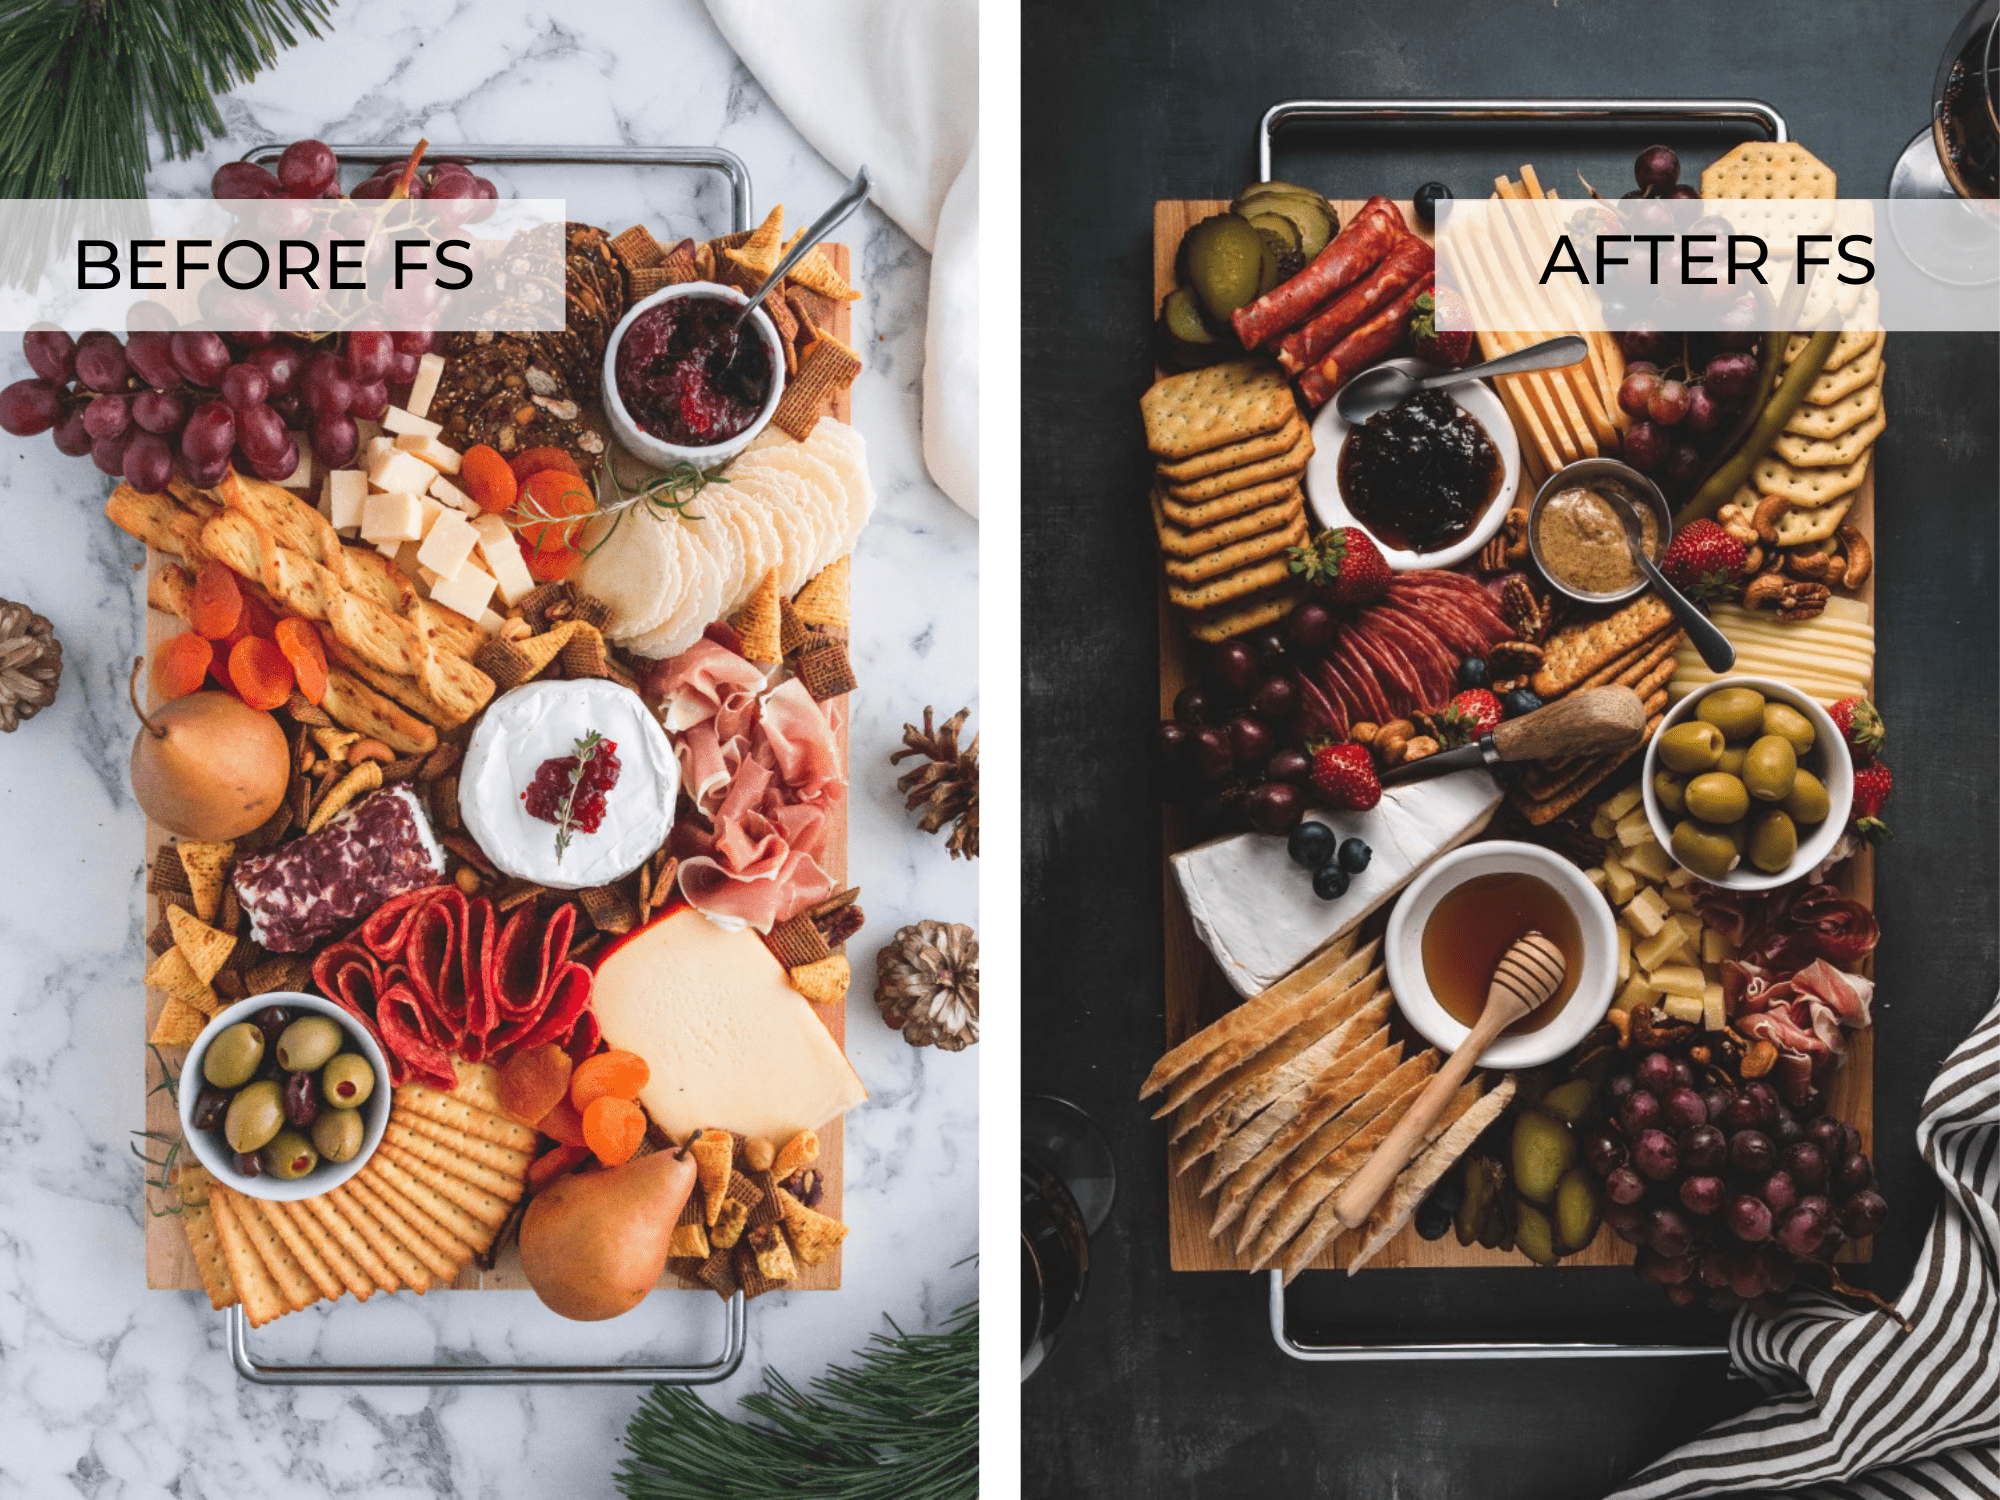 SIDE BY SIDE IMAGES OF CHARCUTERIE BOARDS, Foodtography School REVIEW